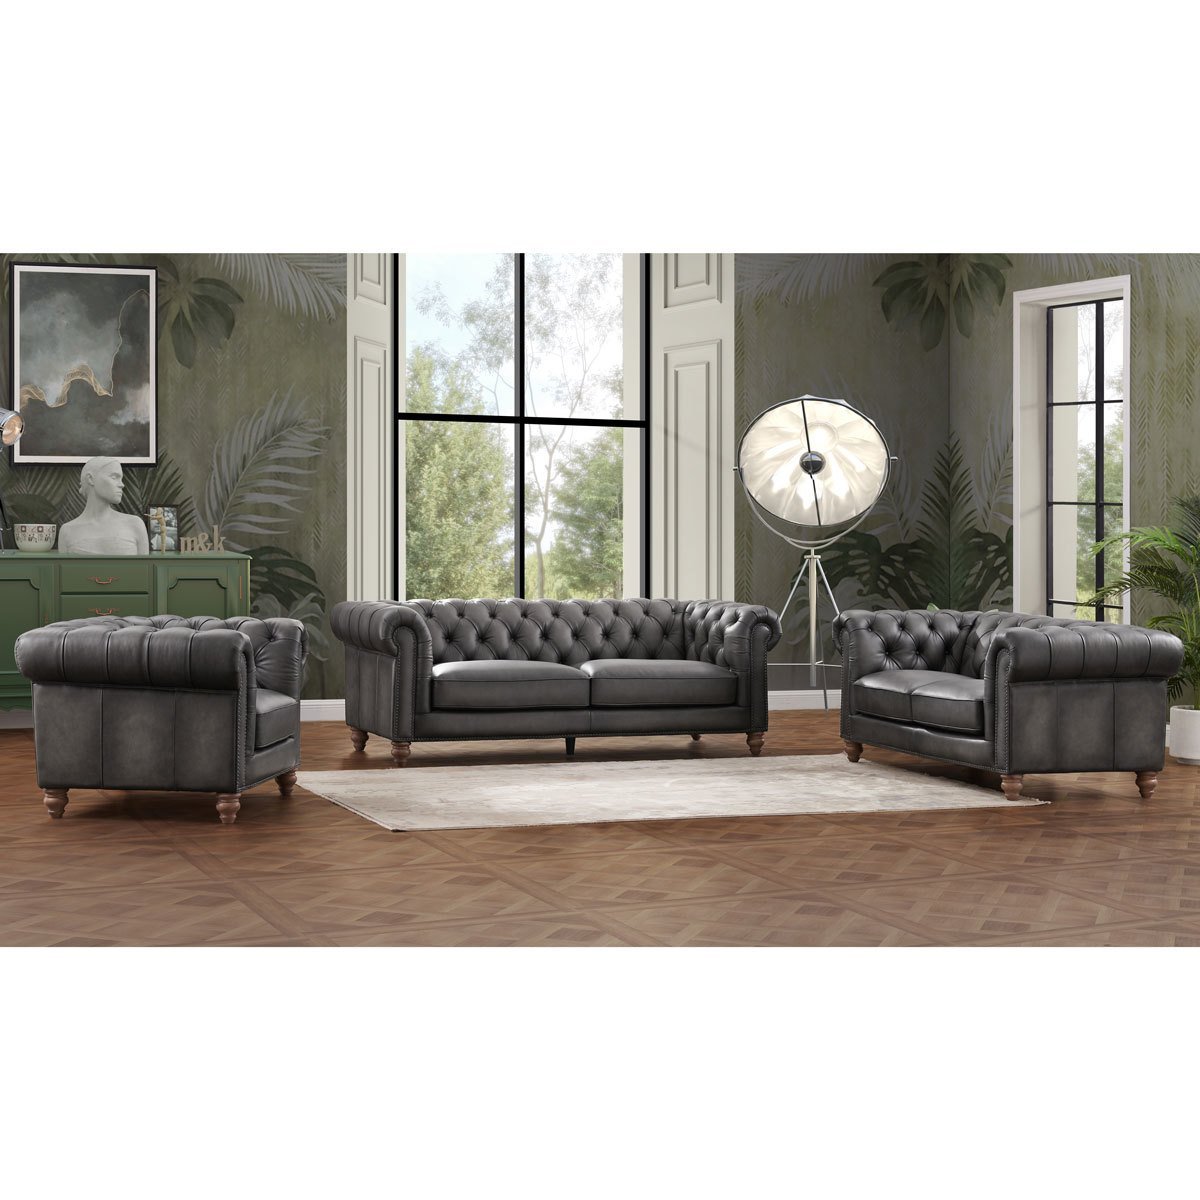 Allington 2 Seater Grey Leather Chesterfield Sofa - Signature Retail Stores